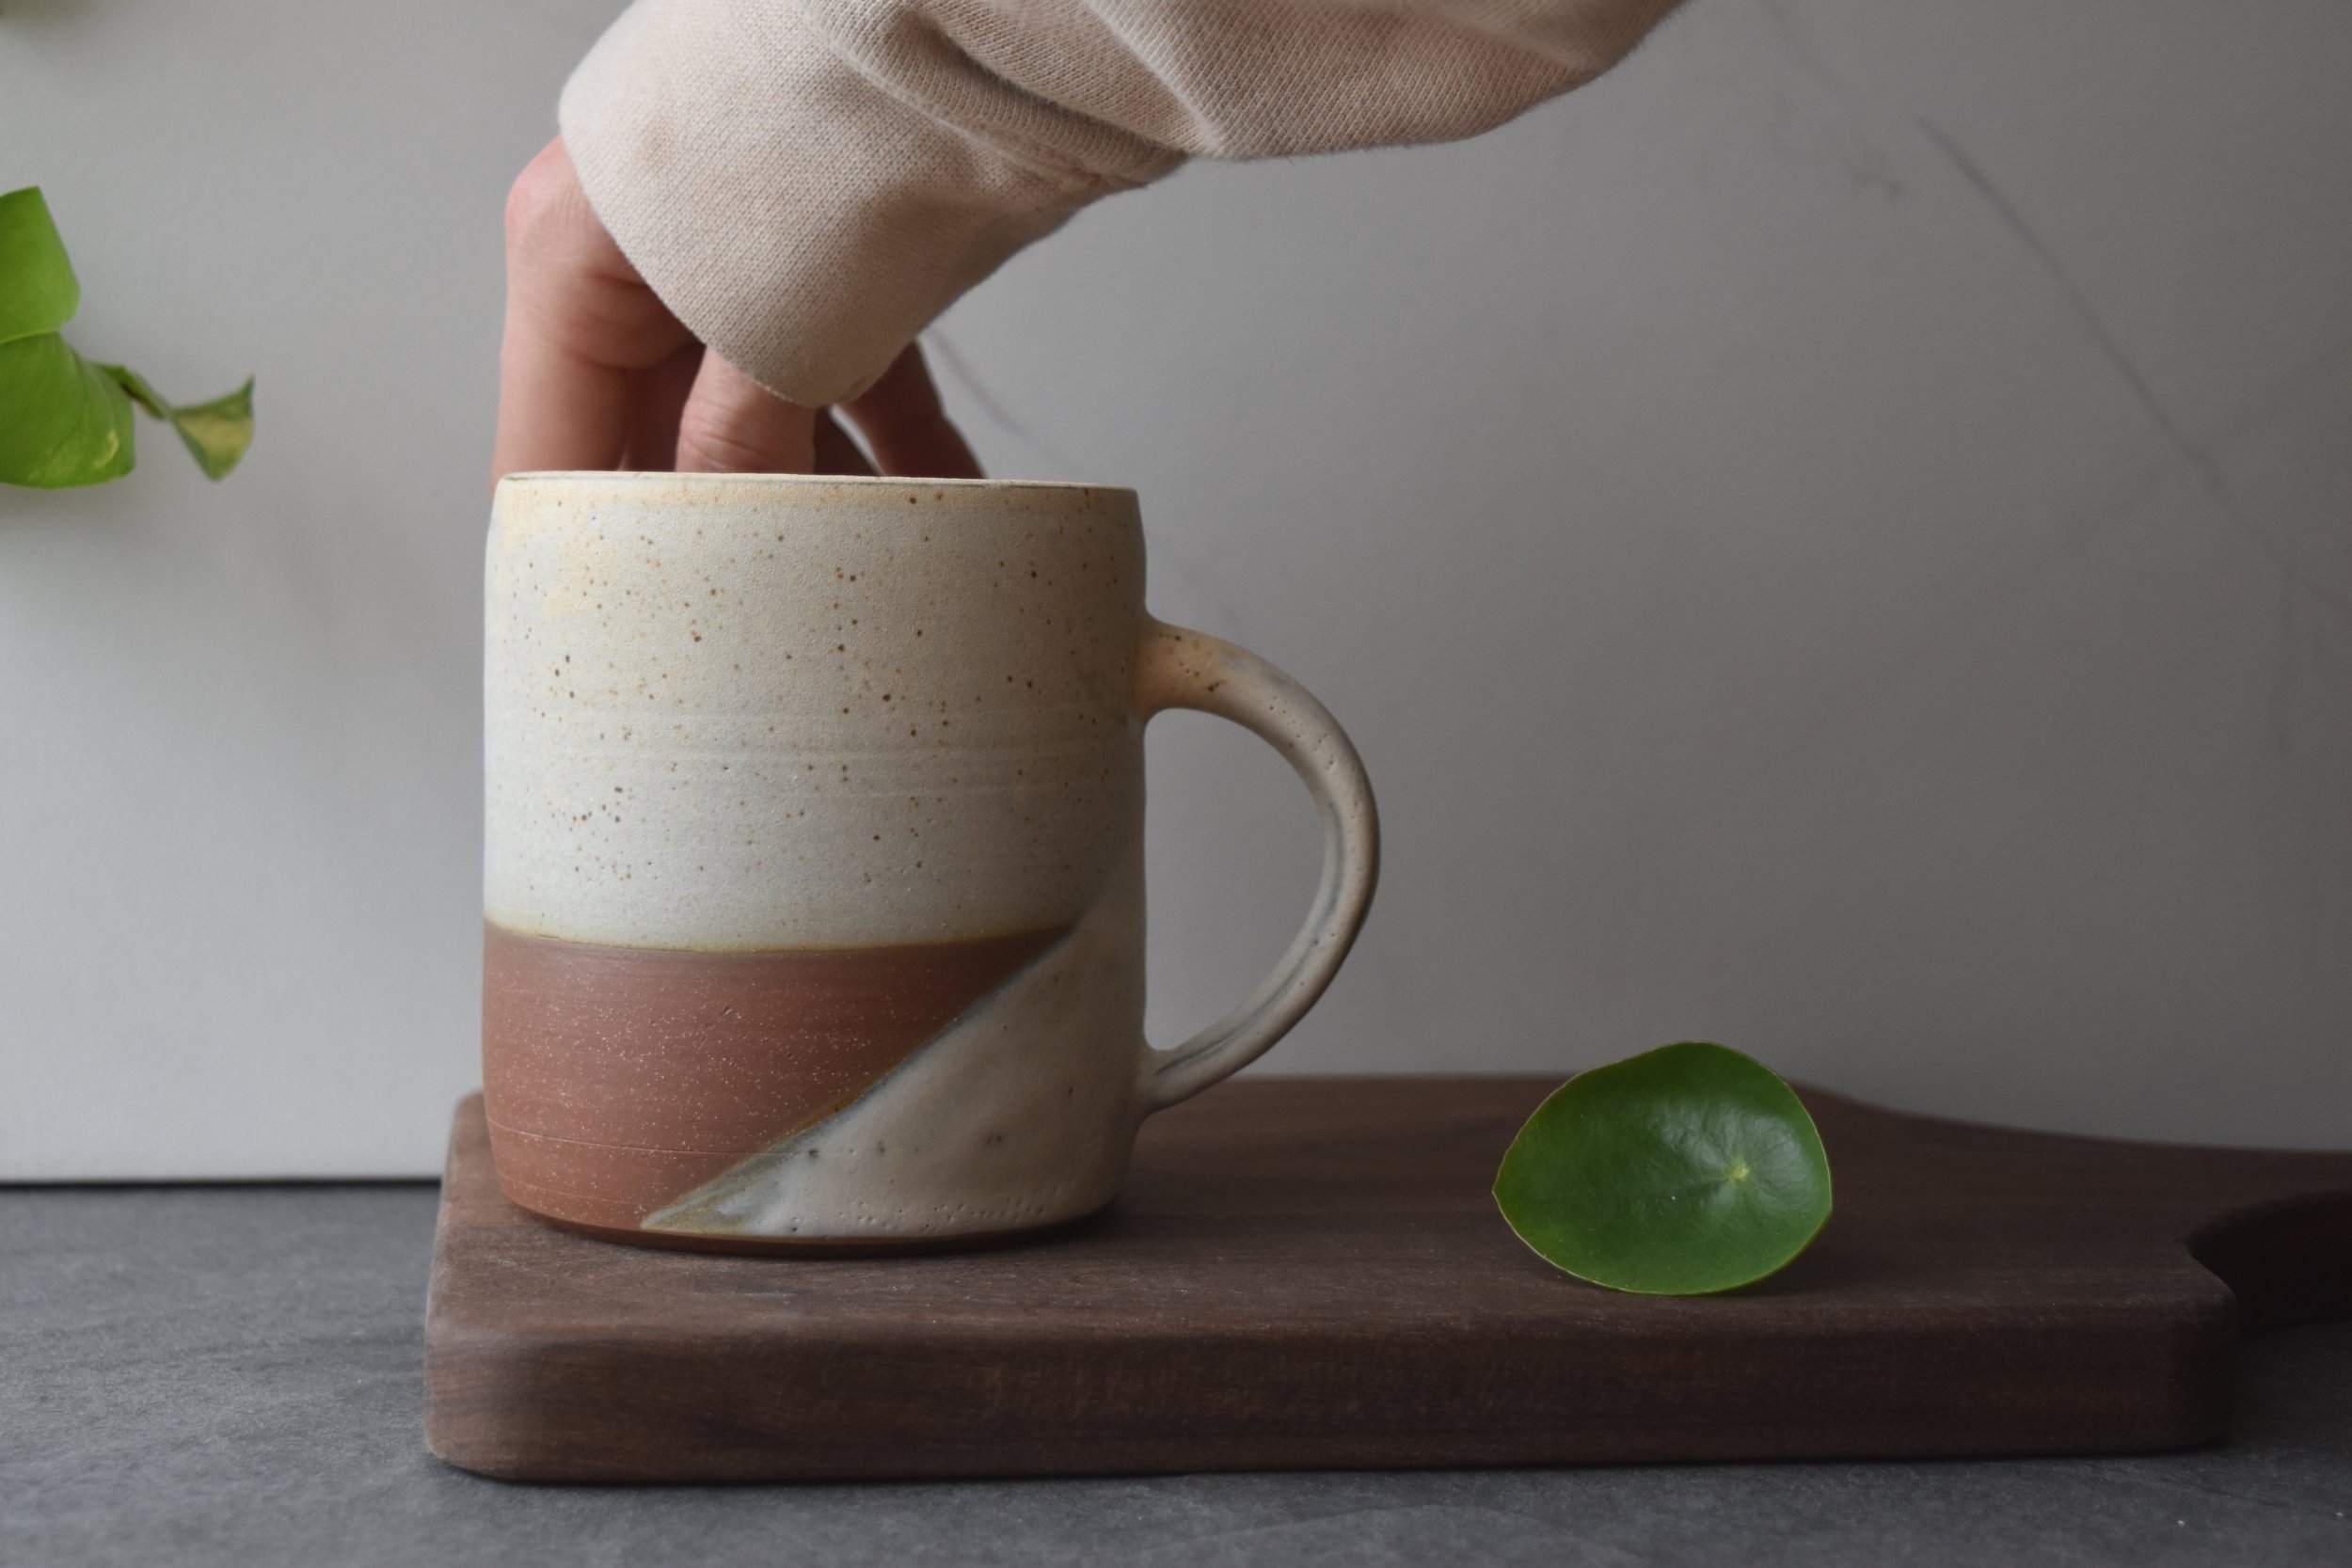 FIND YOUR CENTER POTTERY CLASS — mind . body . clay